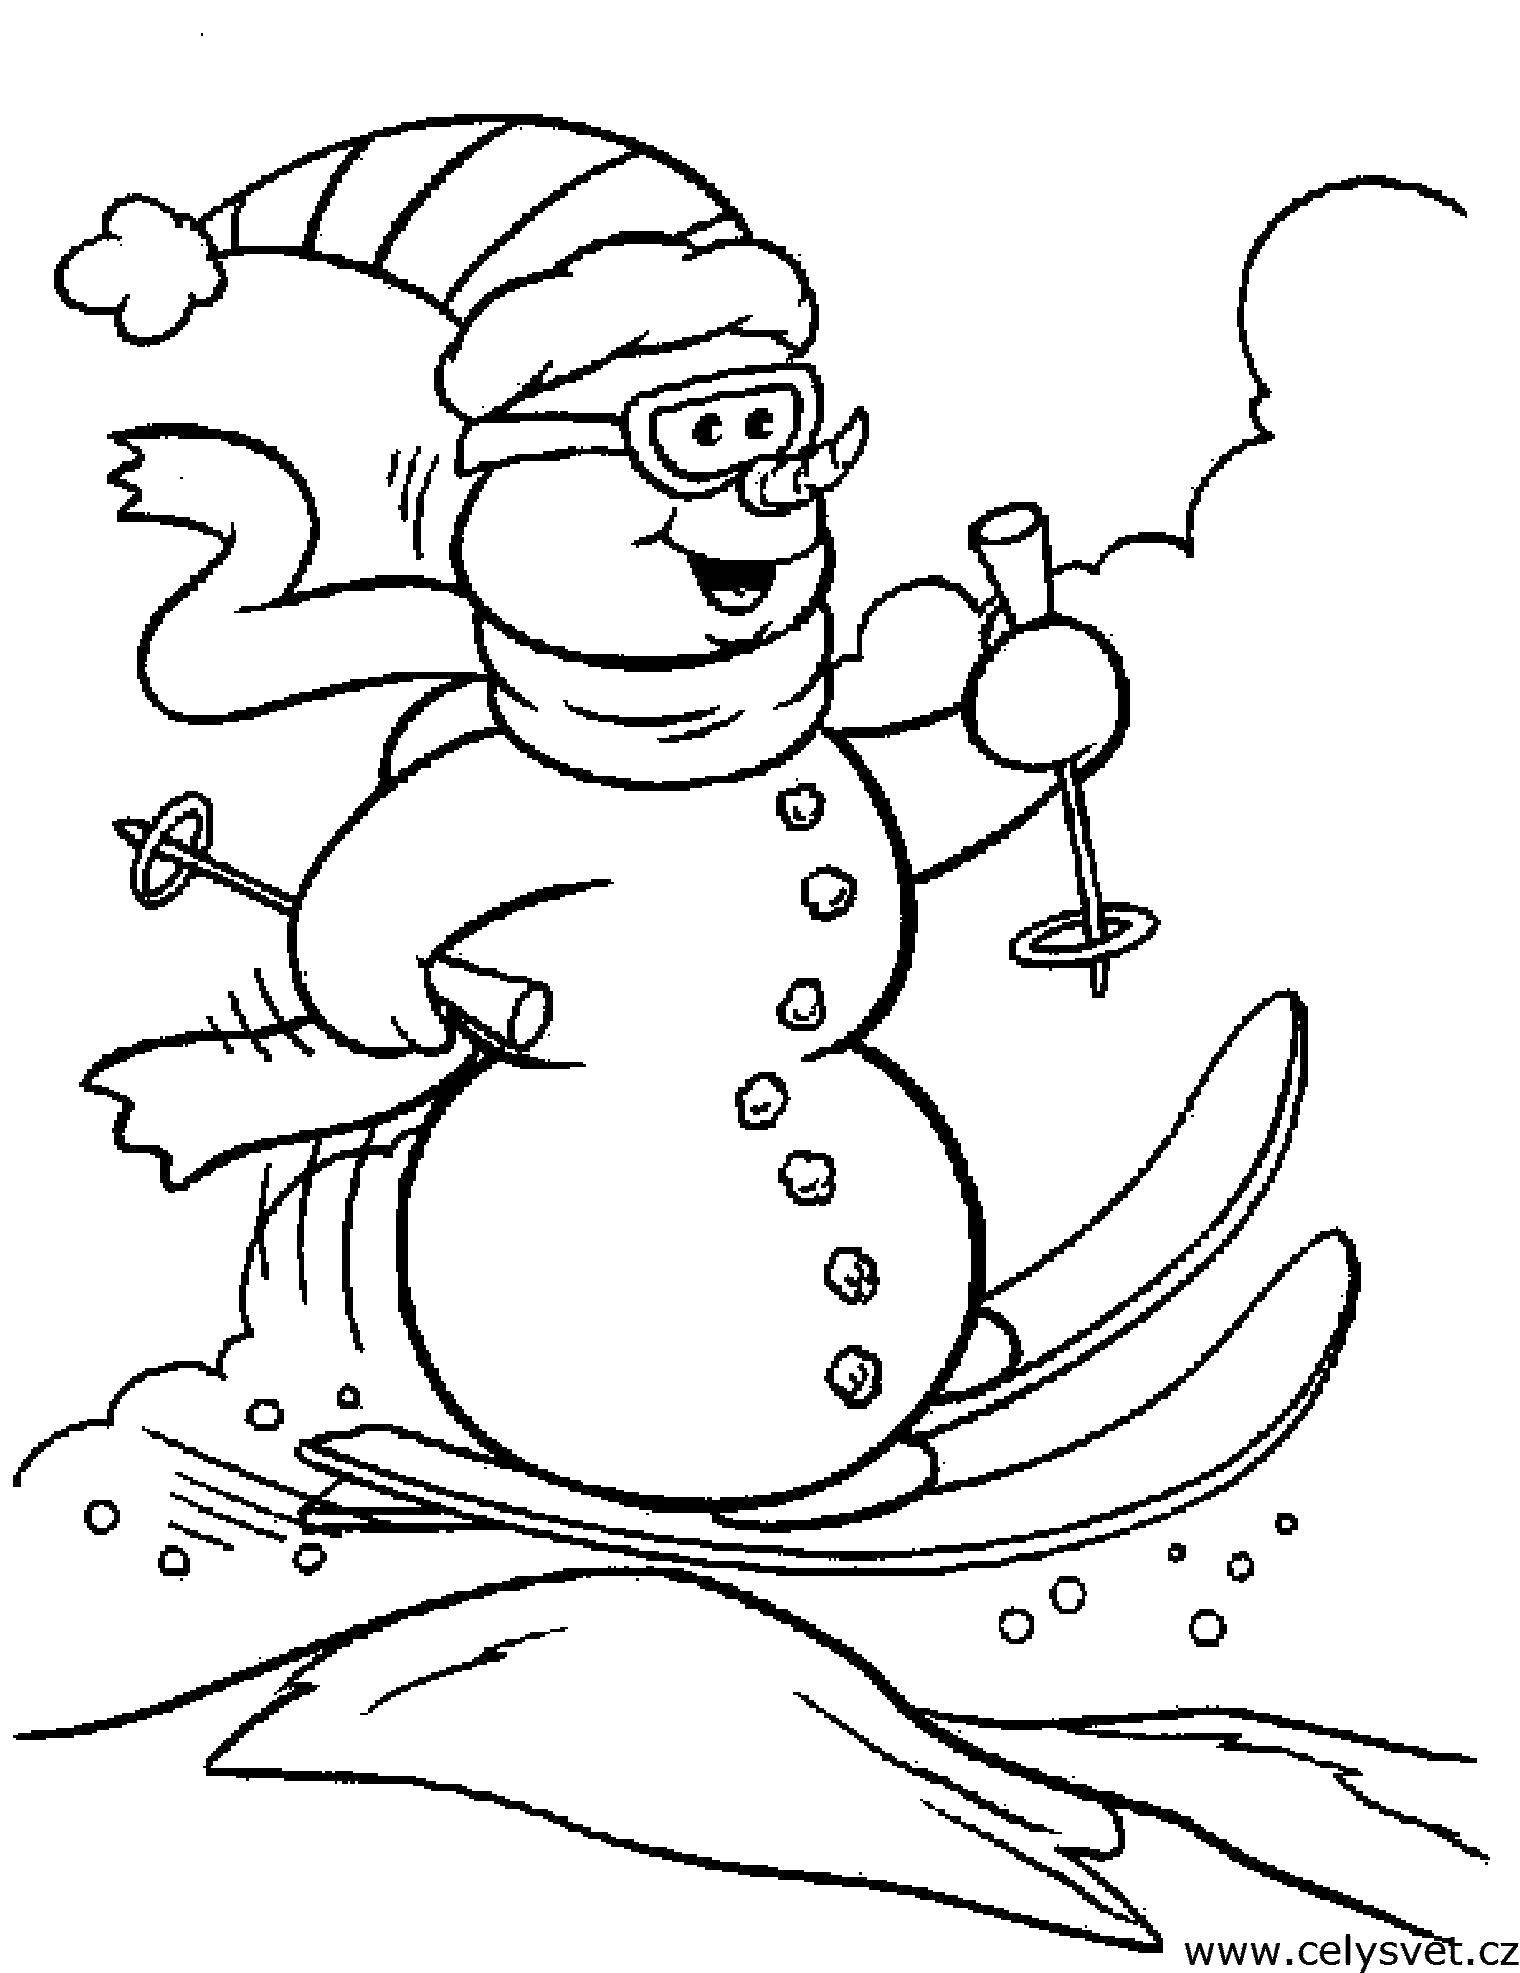 Coloring Snowman. Category snowman. Tags:  snowman, skiing.